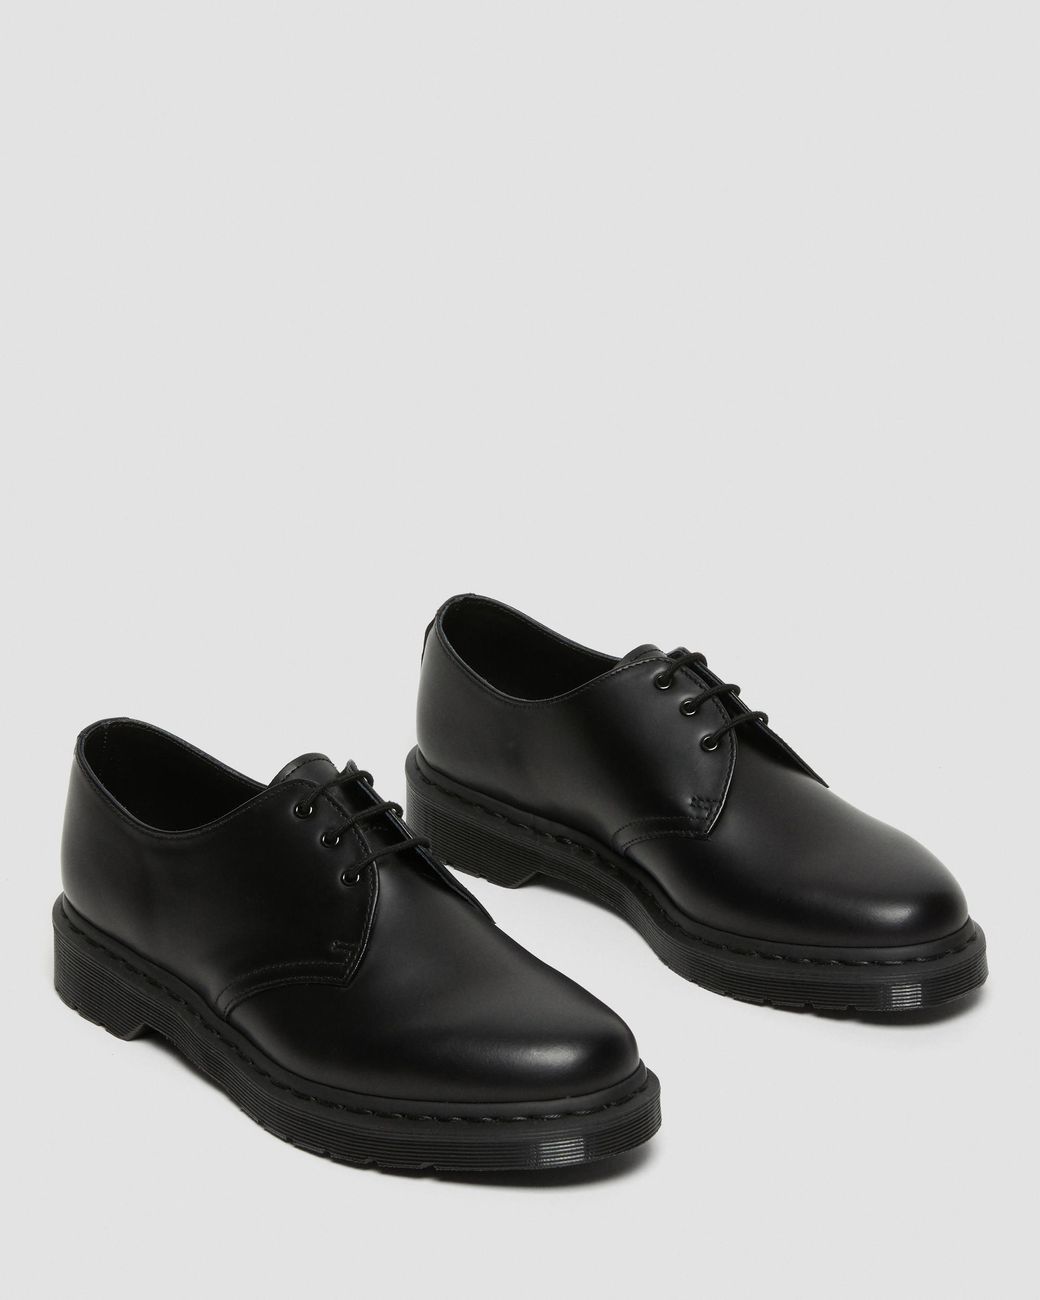 Dr. Martens 1461 Mono Smooth Leather Oxford Shoes in Black | Lyst